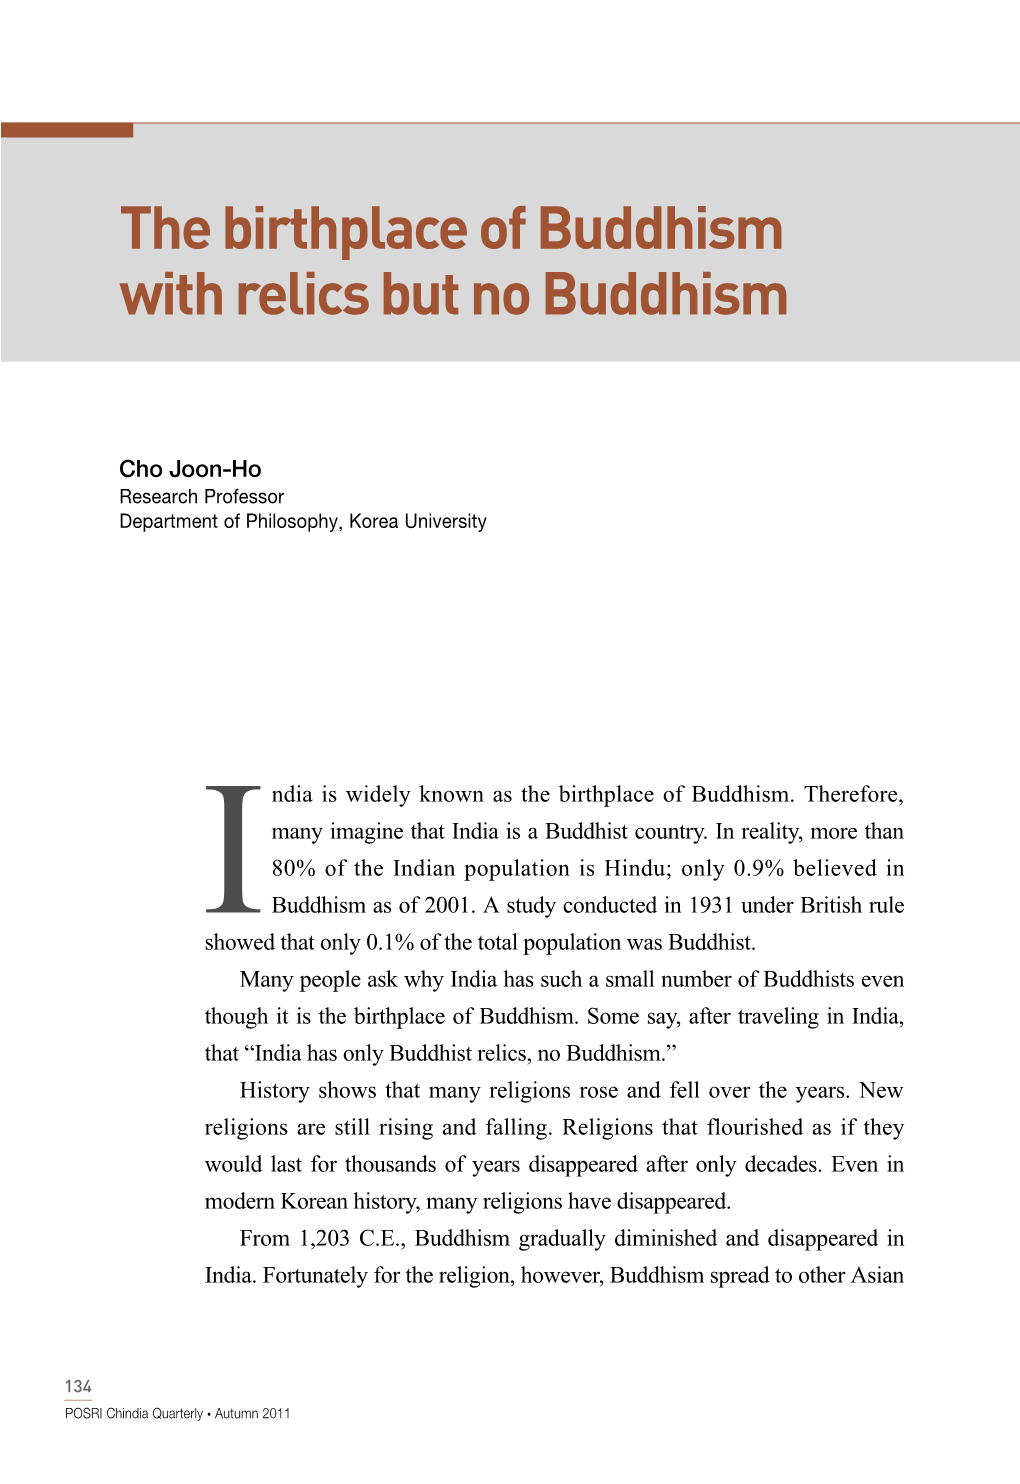 The Birthplace of Buddhism with Relics but No Buddhism